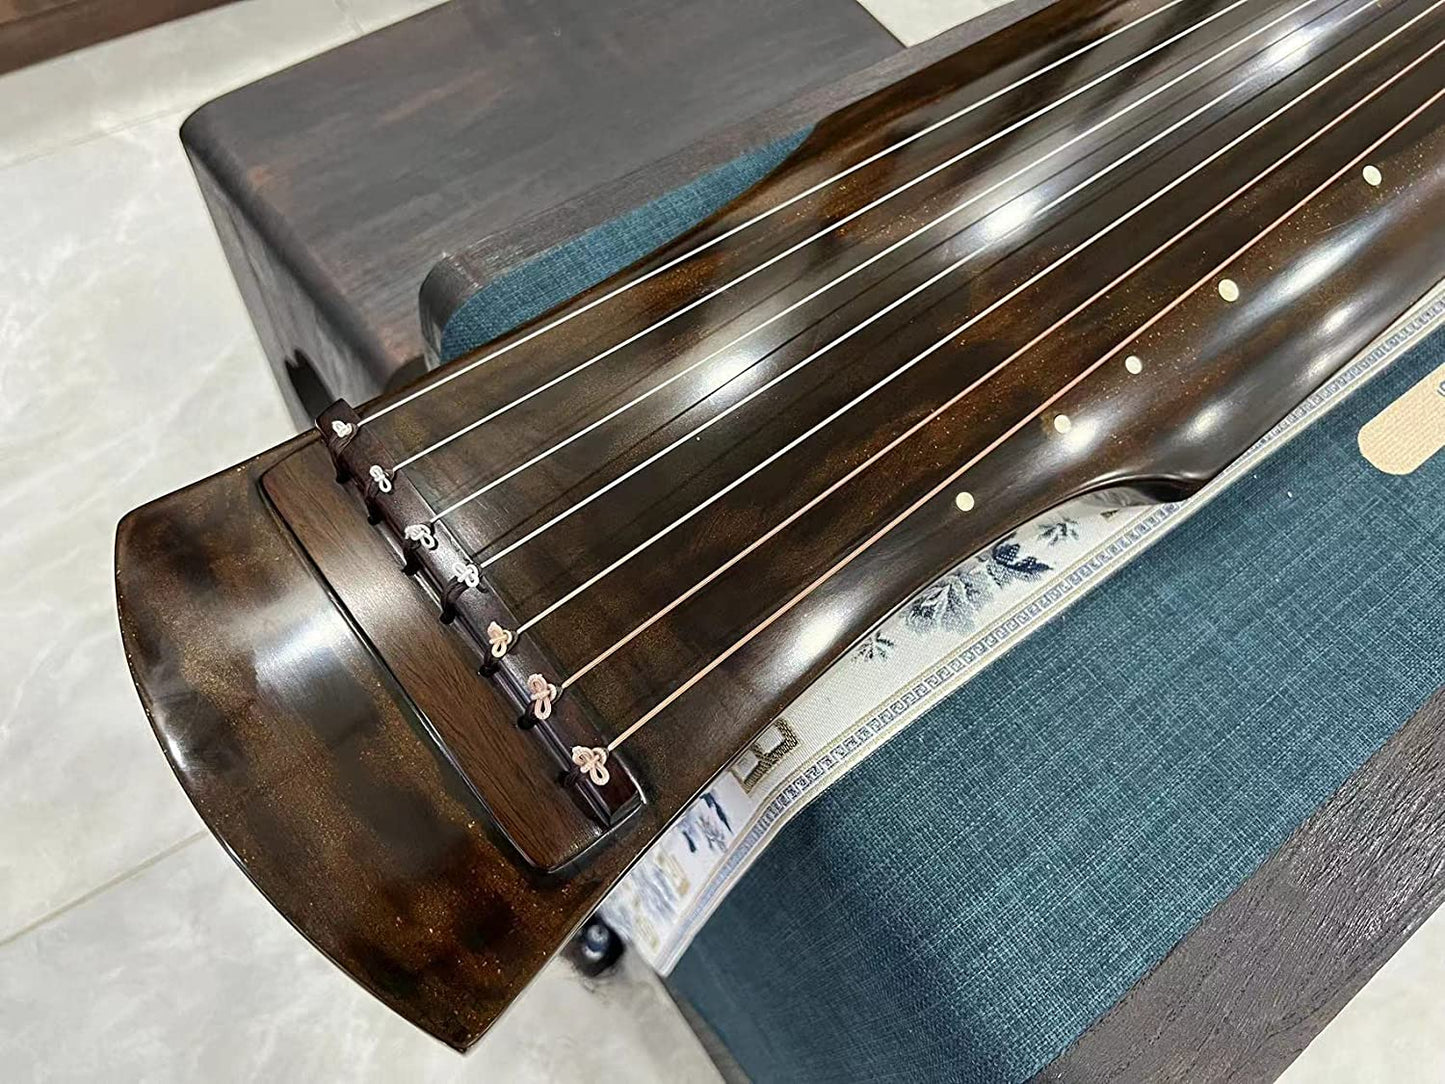 LANDTOM High-Level/Concert level pure handmade Fuxi style 100+ years Fir(杉木）Guqin/Chinese zither by famous master